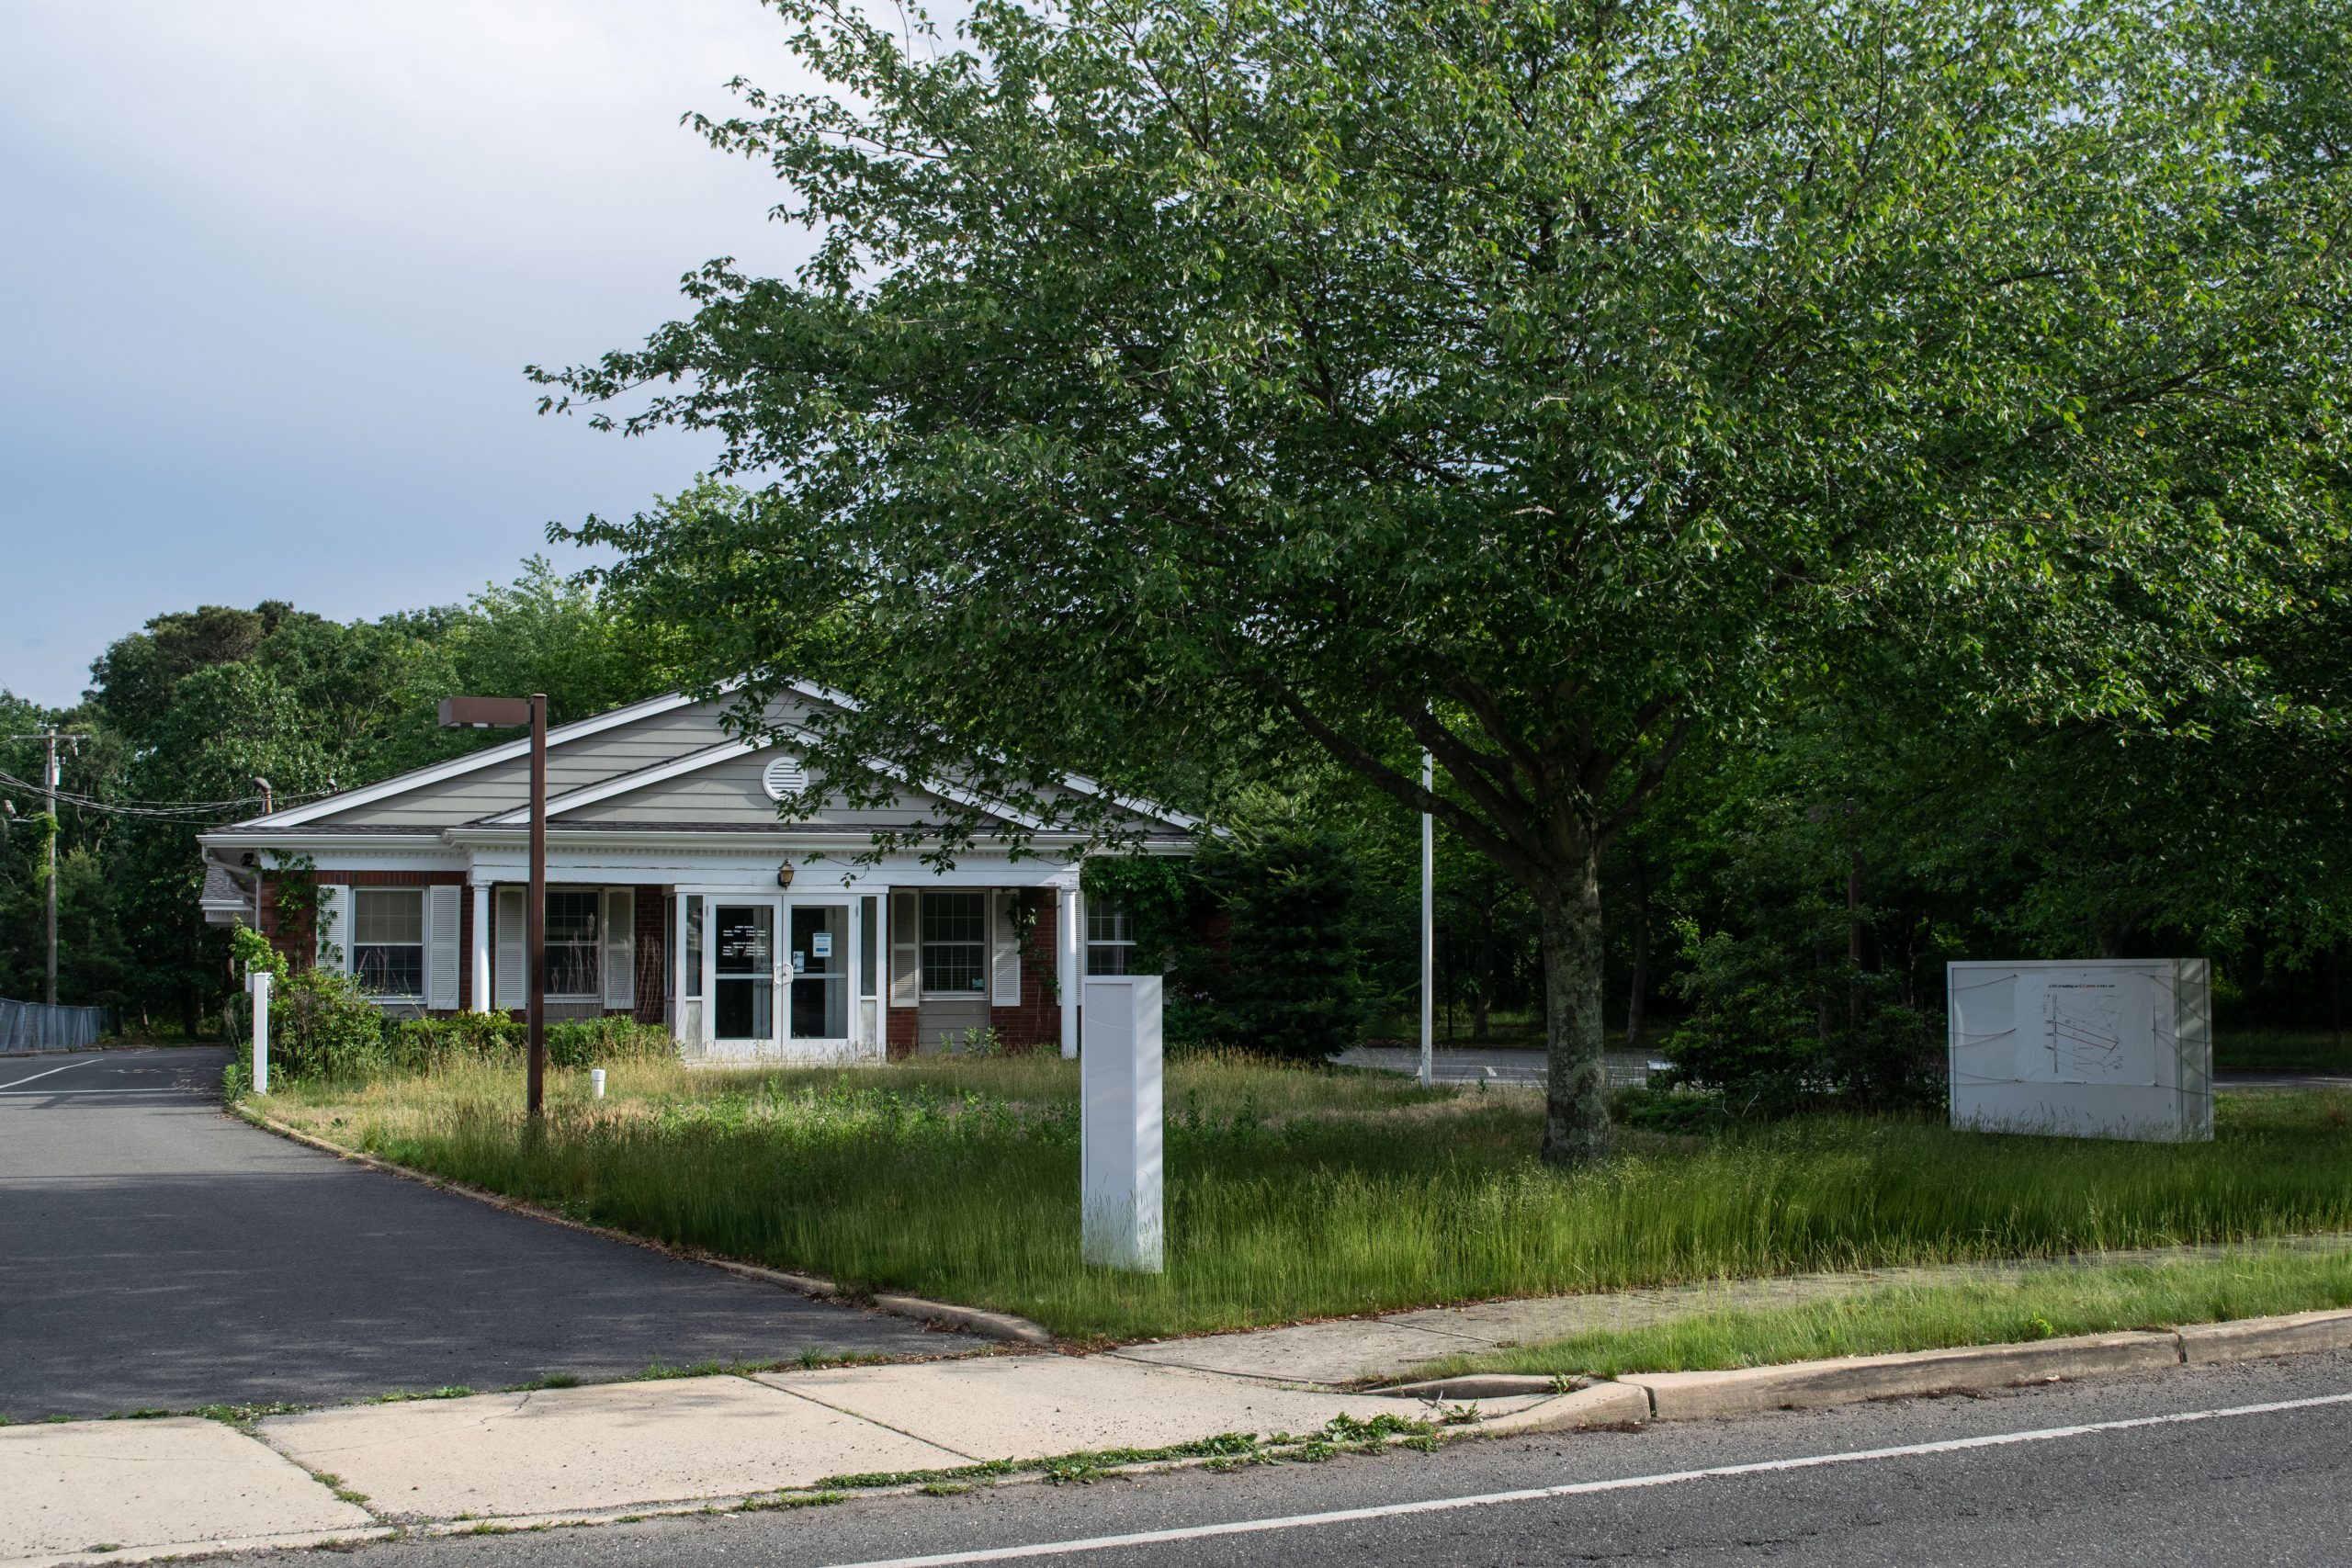 The site of a now-abandoned plan to open a medical marijuana dispensary in Brick at 385 Adamston Road. (Photo: Daniel Nee)